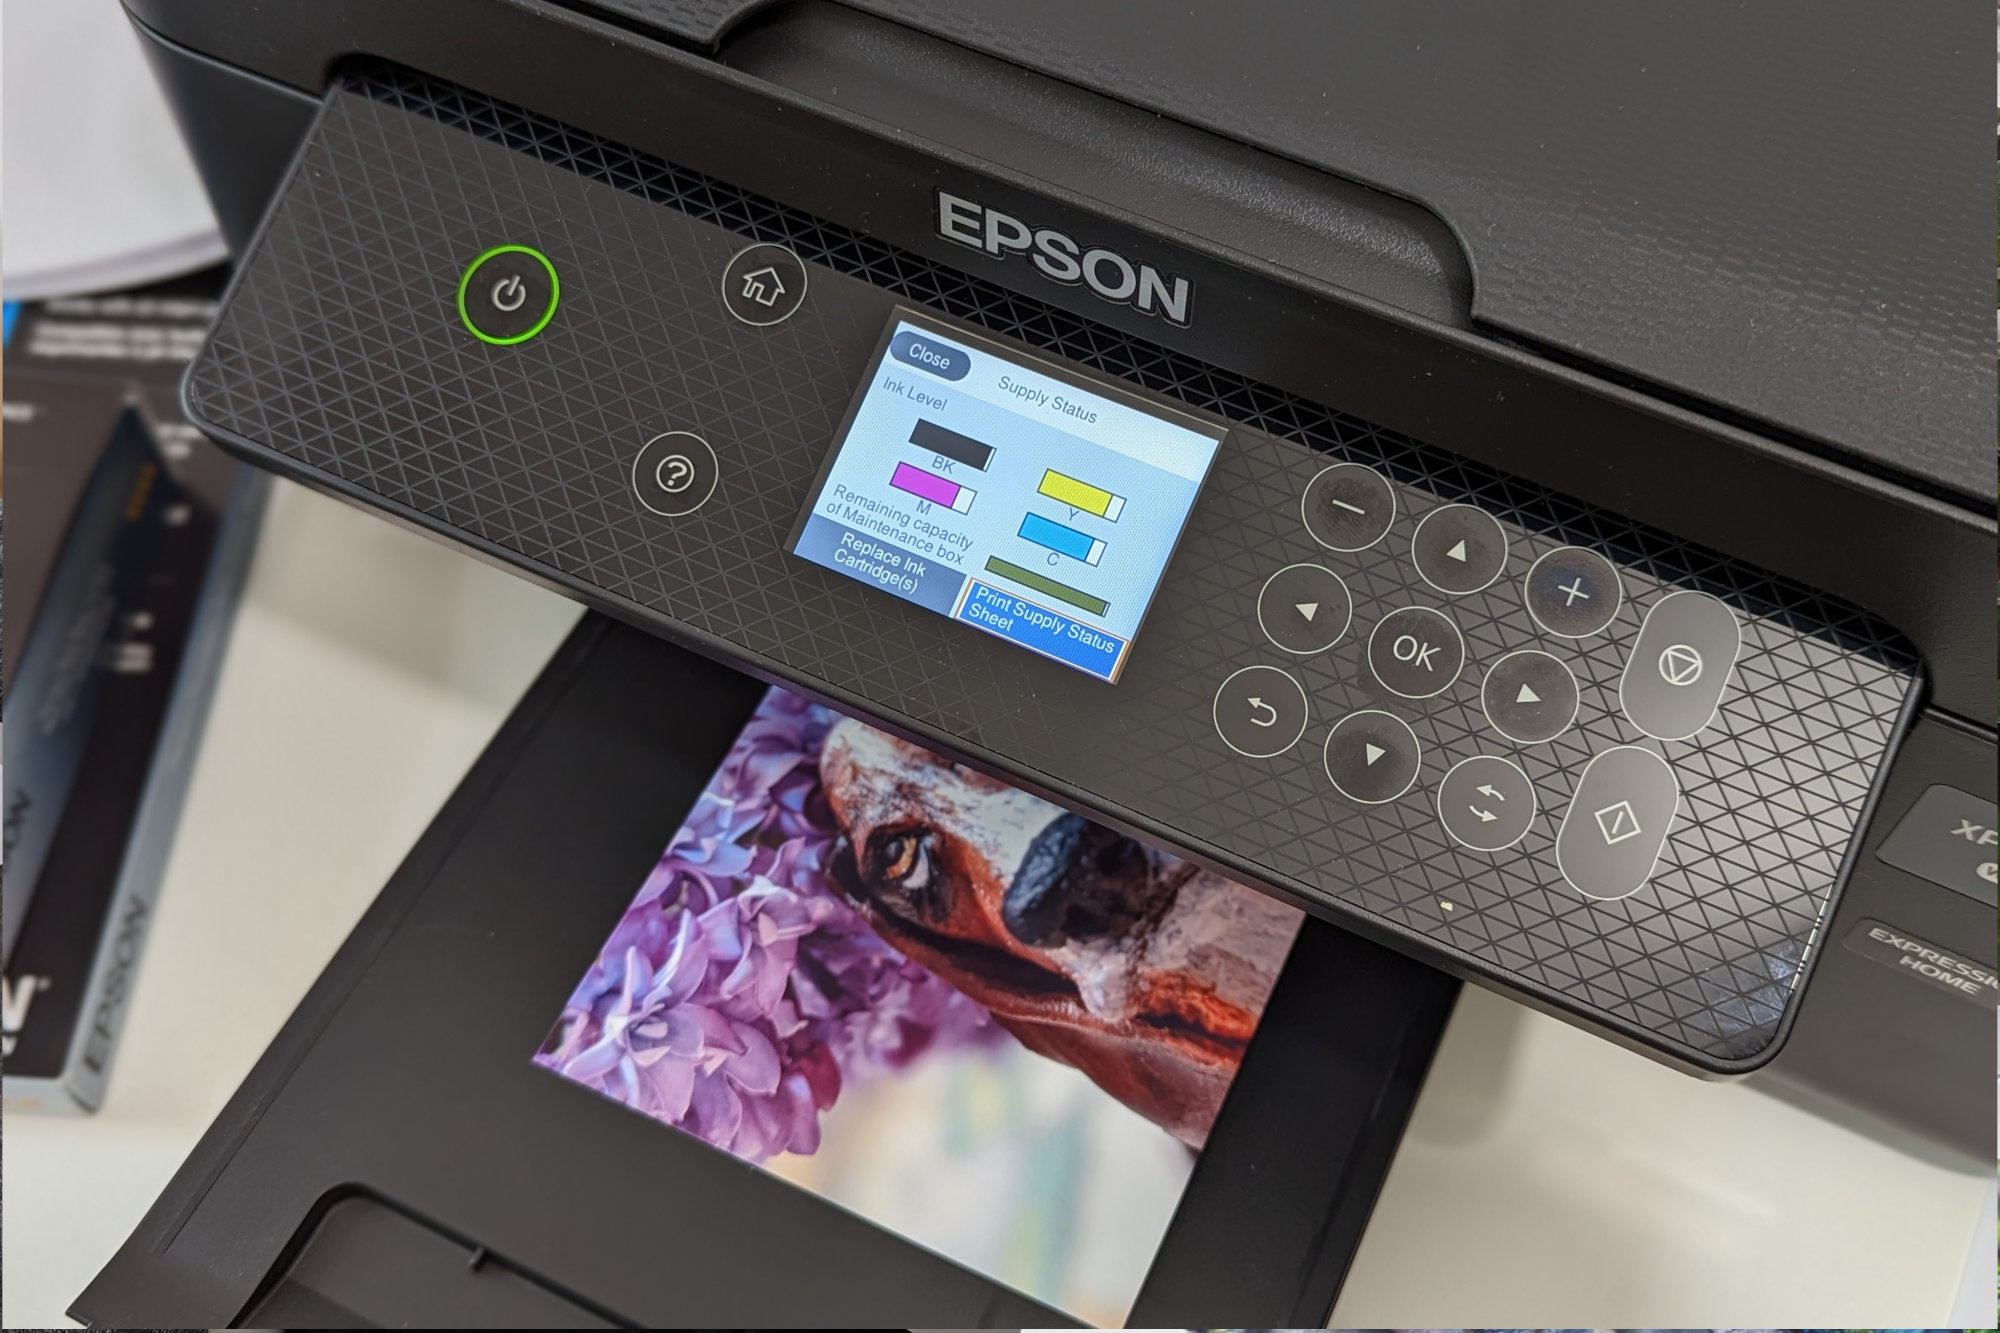 Epson Expression XP-102 – Performance and Verdict Review